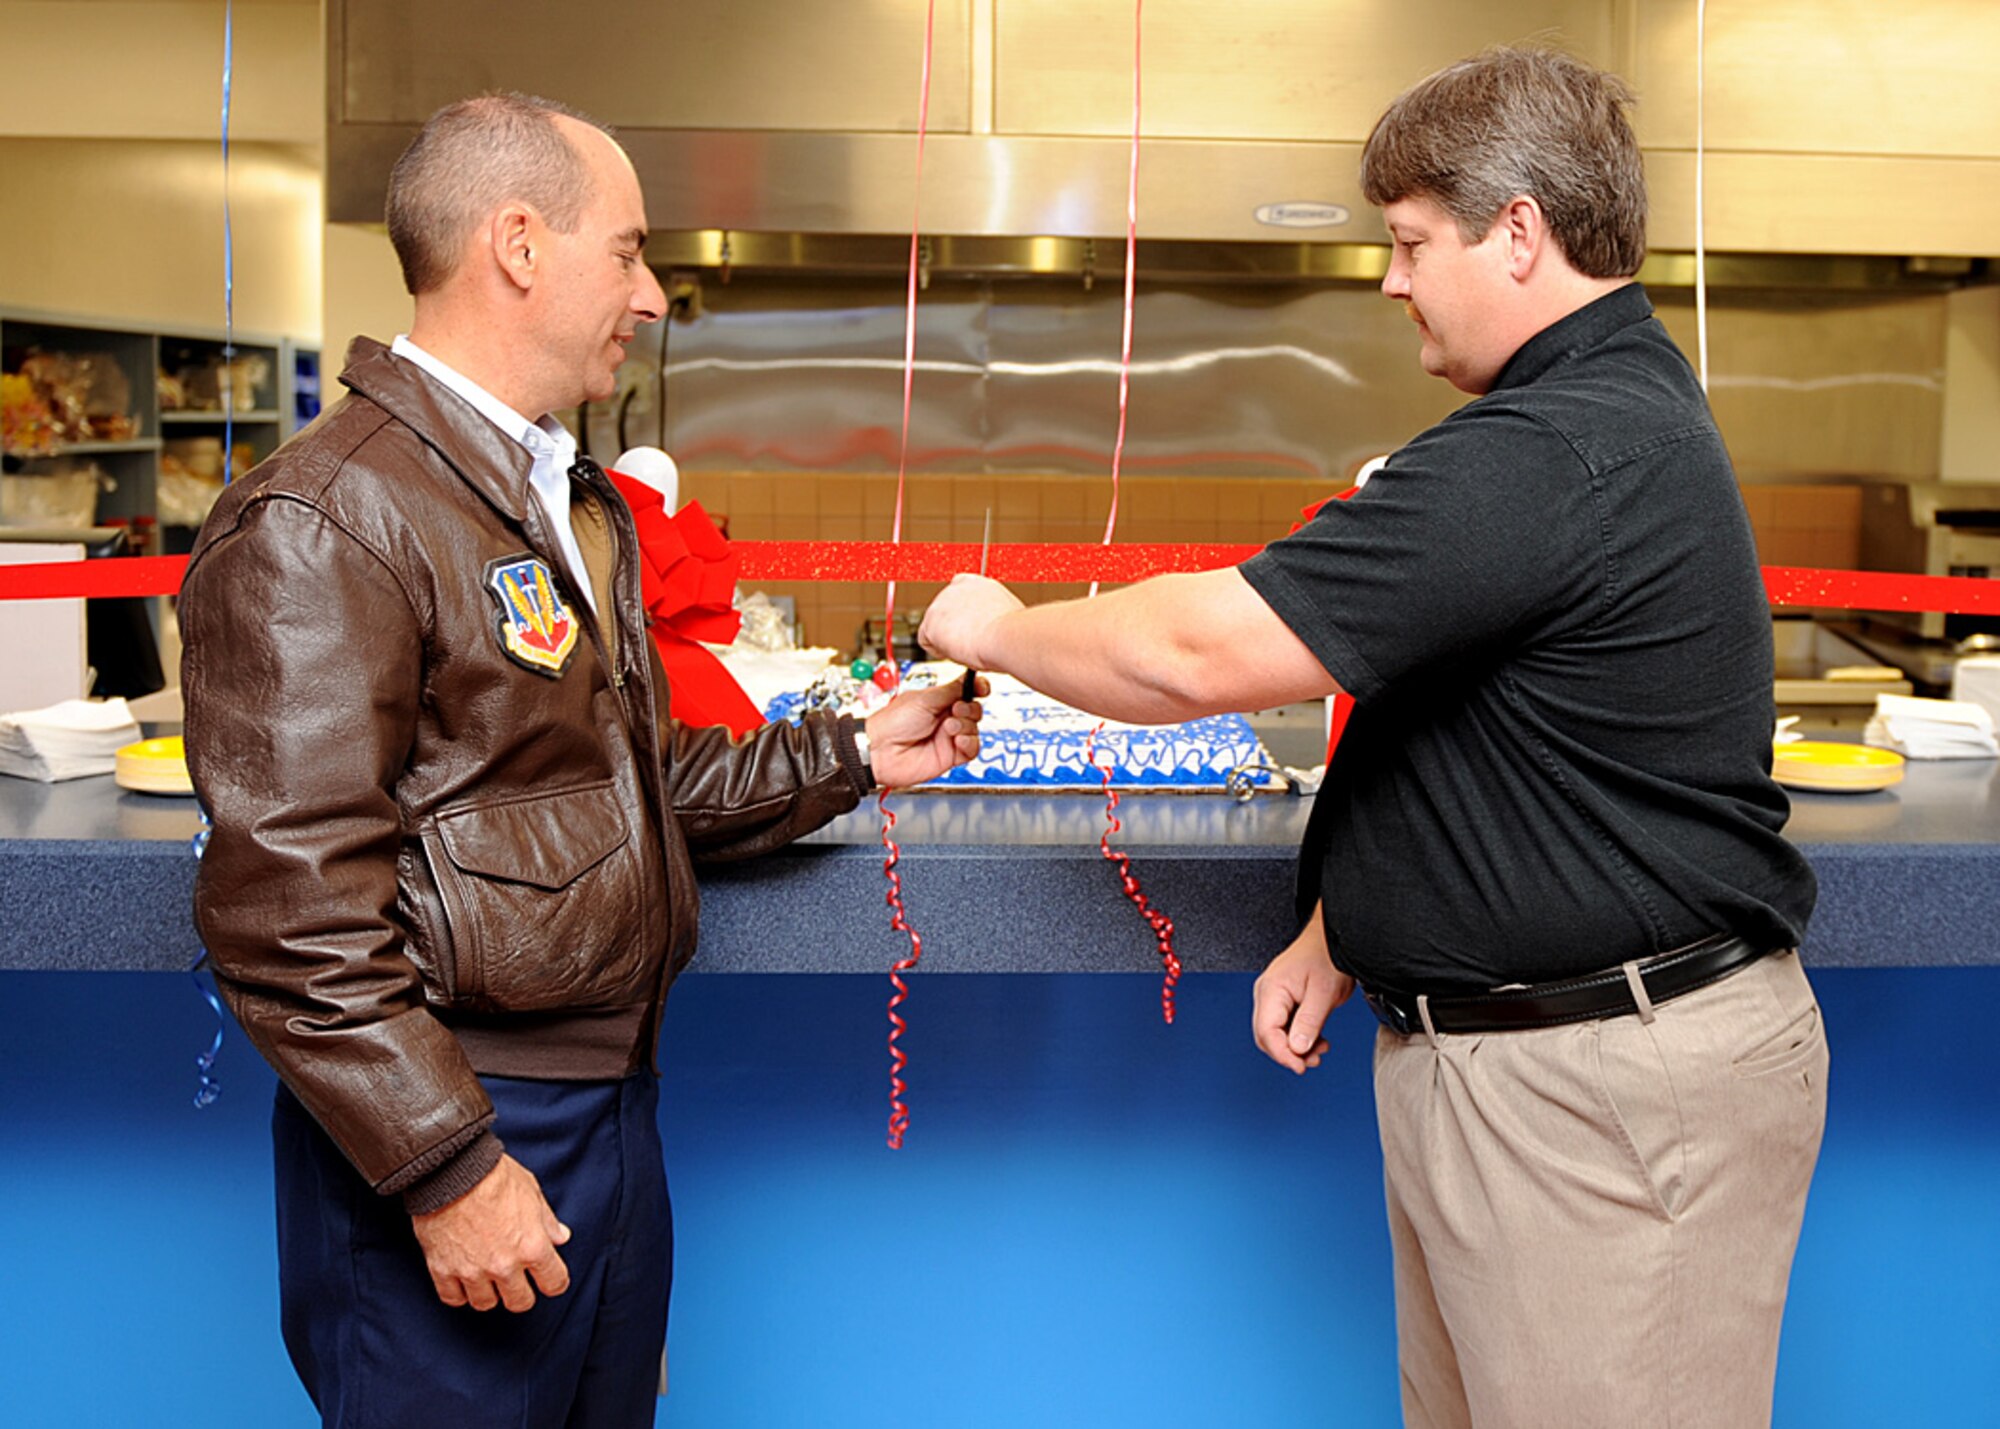 Col. Jeff Harrigian, 49th Fighter Wing commander, cuts the ribbon to officially reopen the Desert Lanes bowling alley snack bar Nov. 23 at Holloman Air Force Base, N.M.  The Desert Lane's snack bar reopened with the new items on the menu as well as the old ones.  (U.S. Air Force photo by Airman 1st Class John D. Strong II)